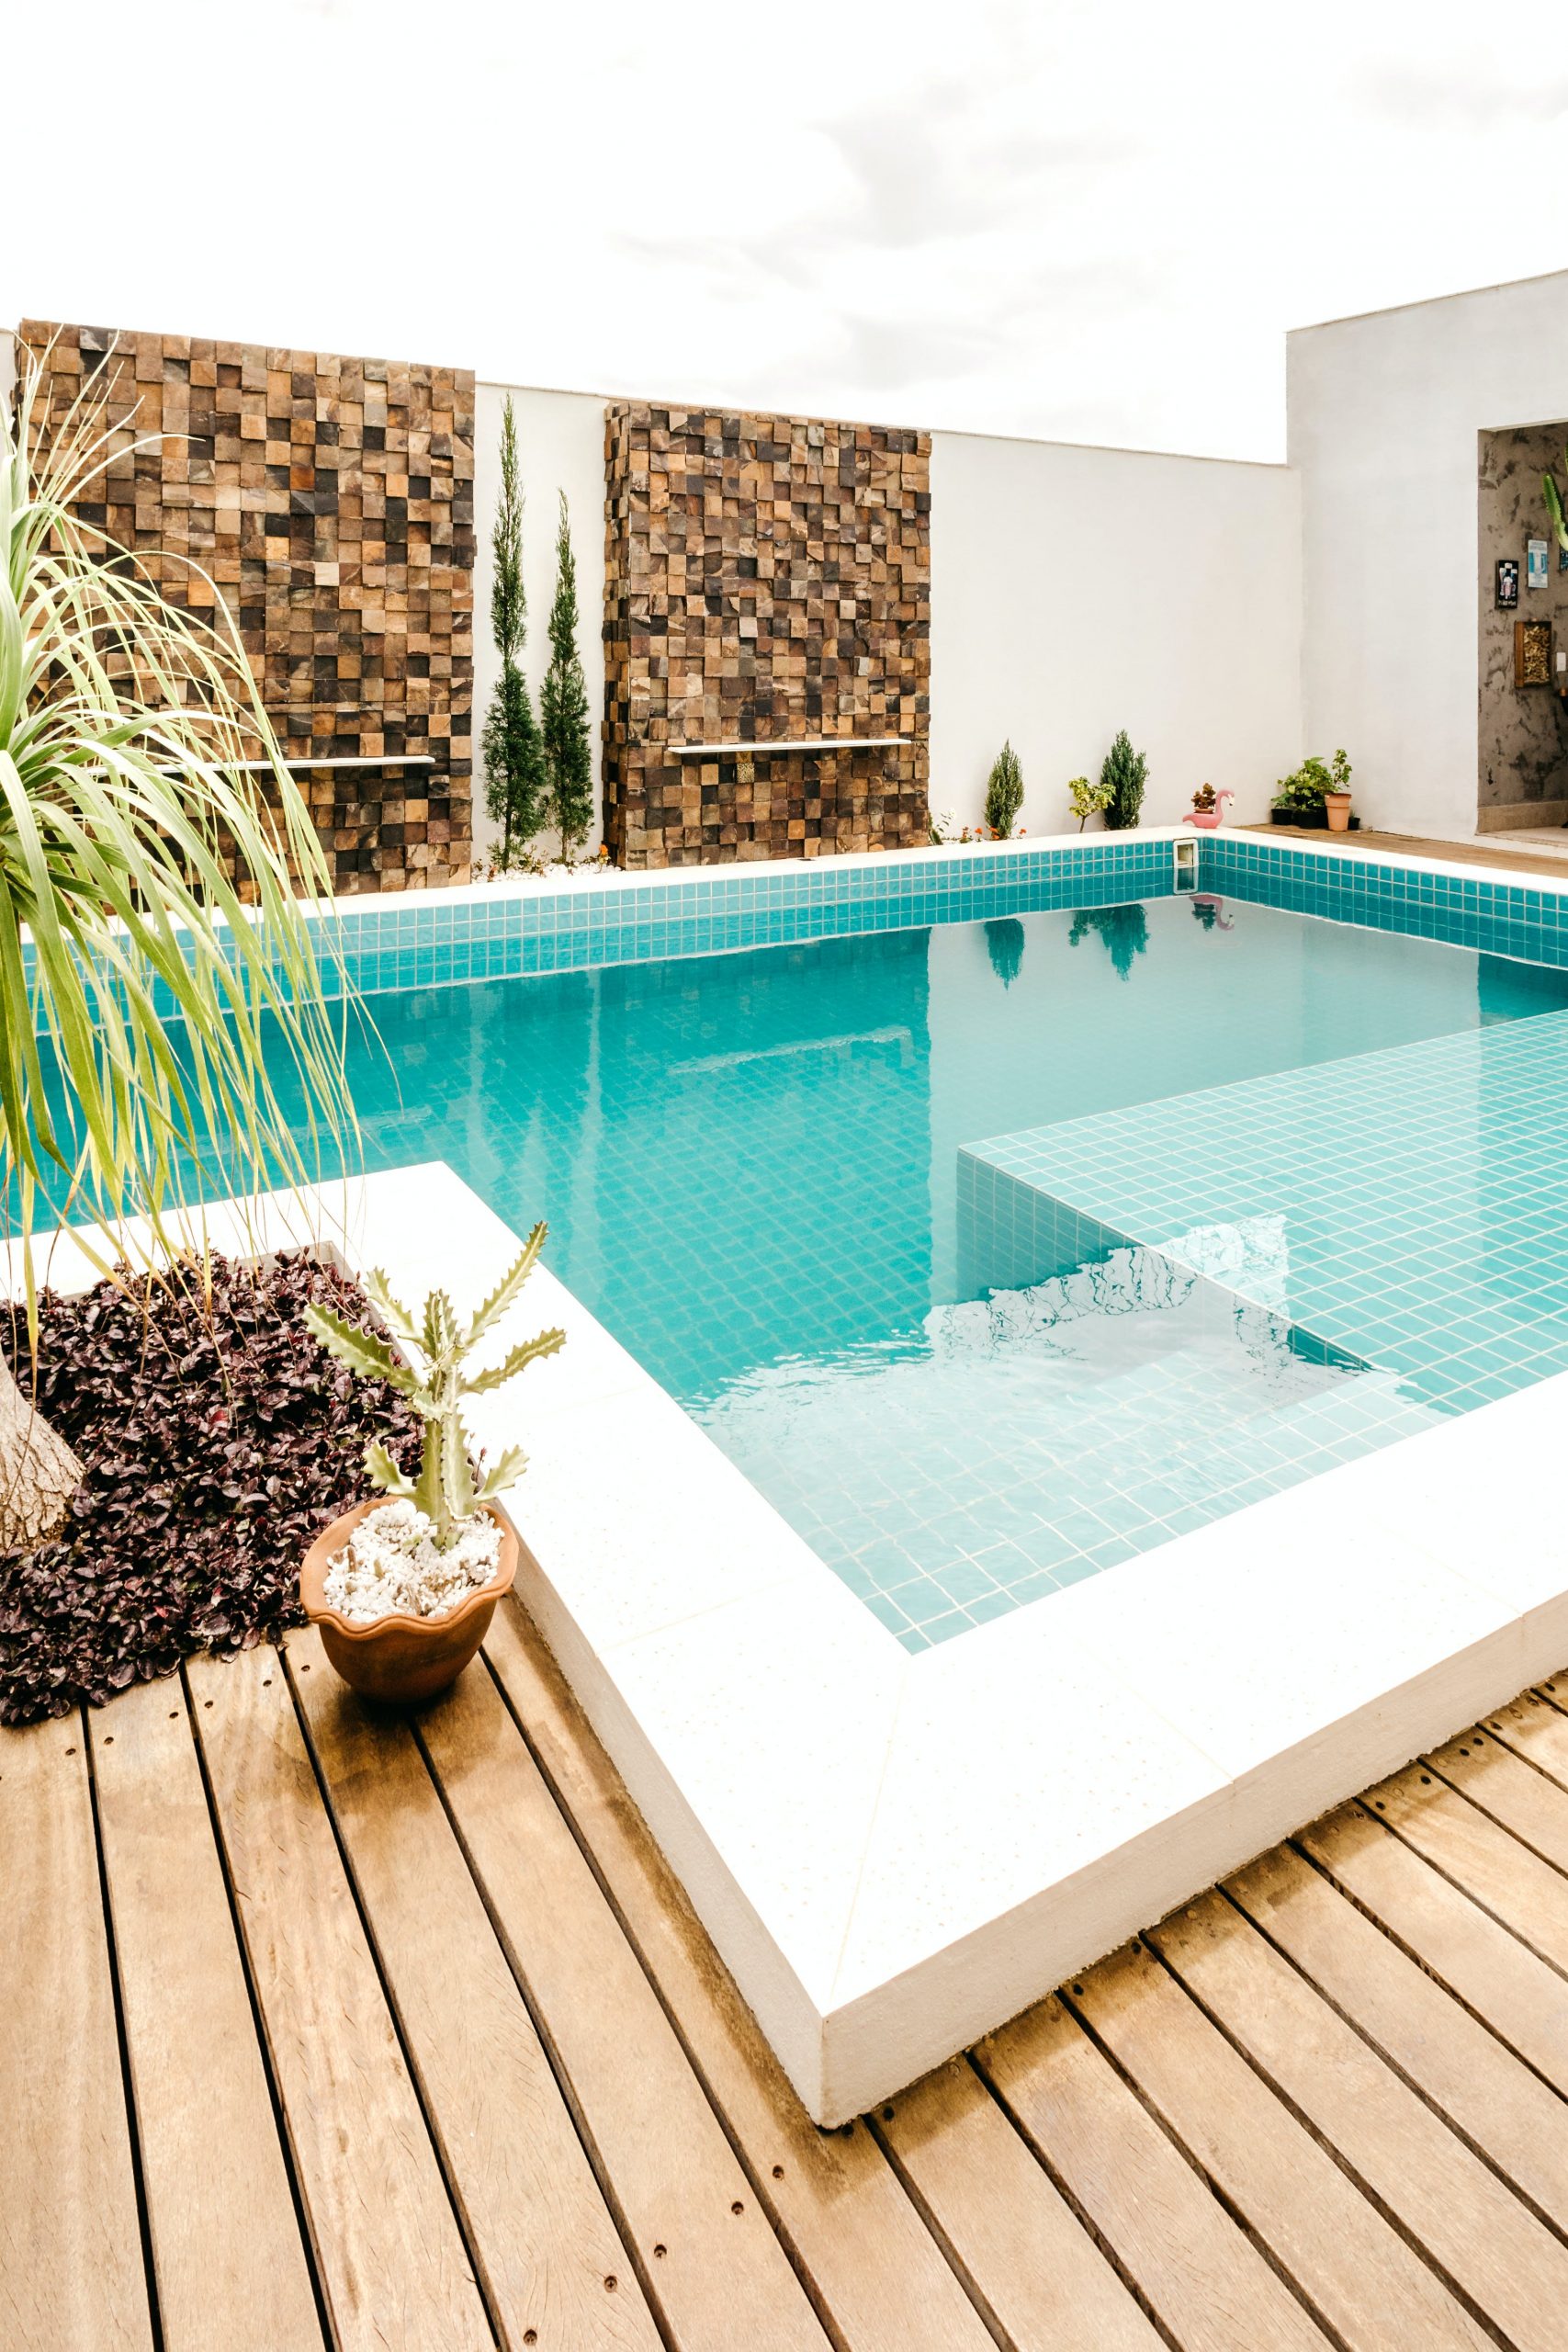 Tips for creating the perfect pool area